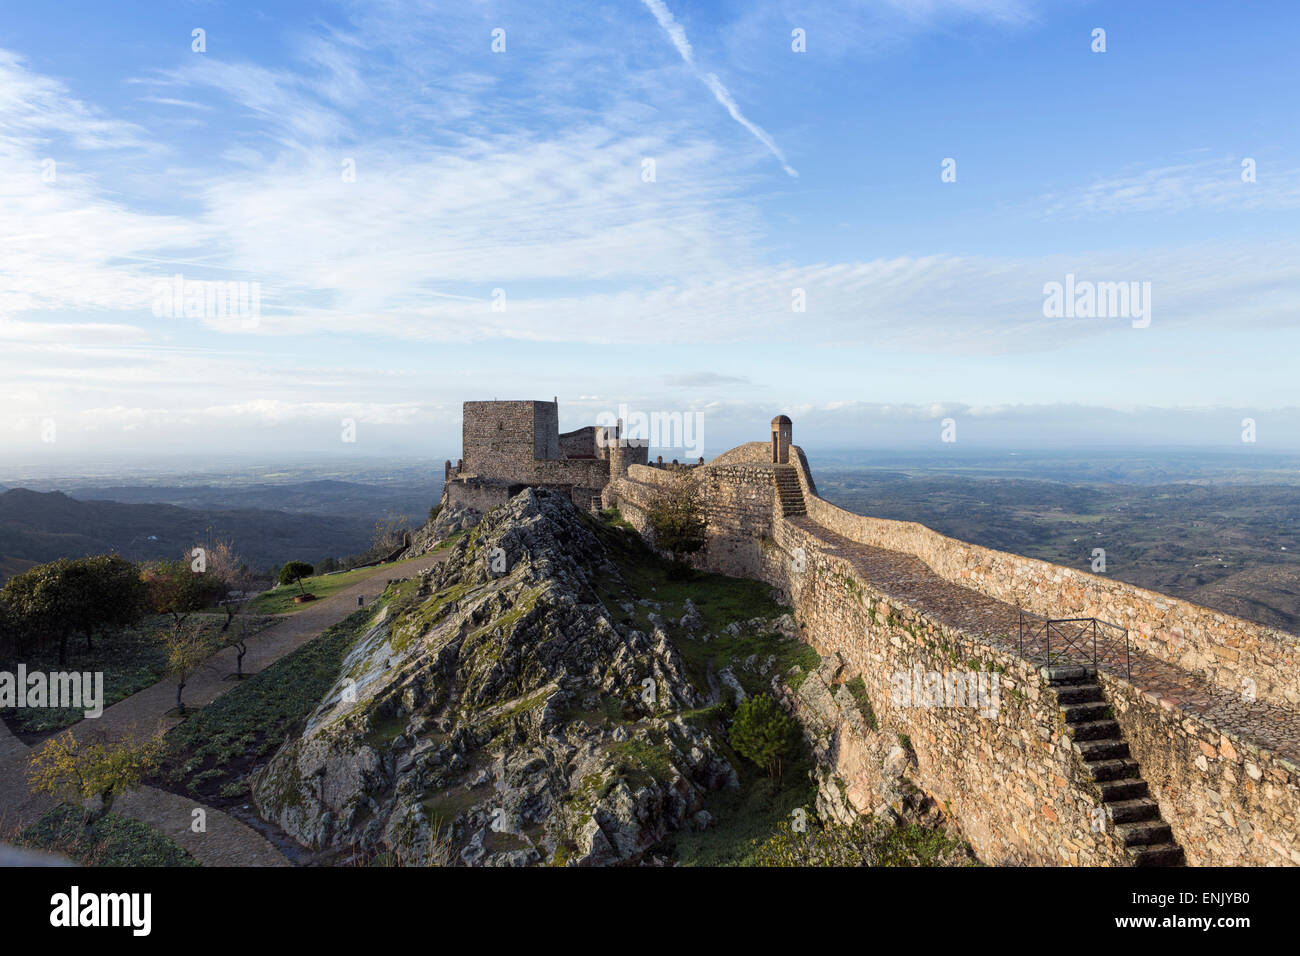 The 13th century medieval castle in Marvao, built by King Dinis, Marvao, Alentejo, Portugal, Europe Stock Photo